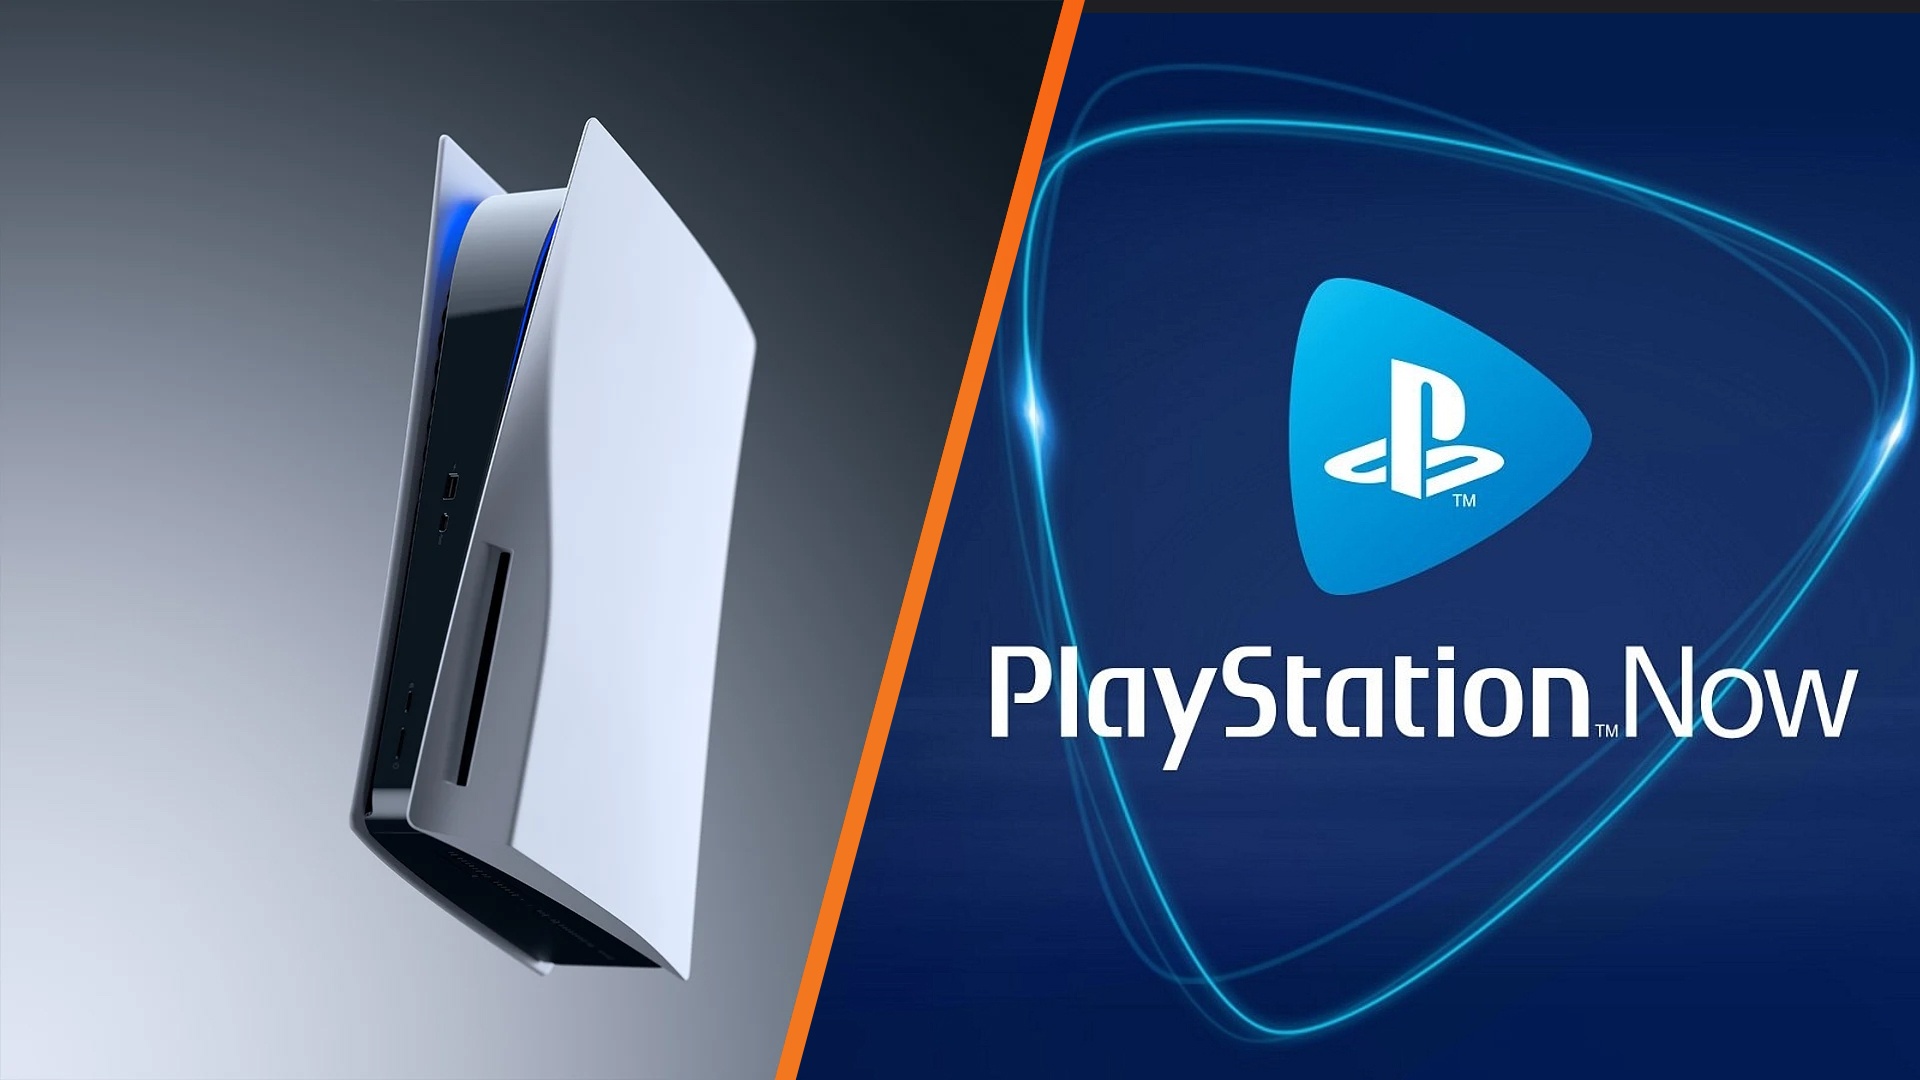 With PlayStation Now, Sony proves that game streaming works